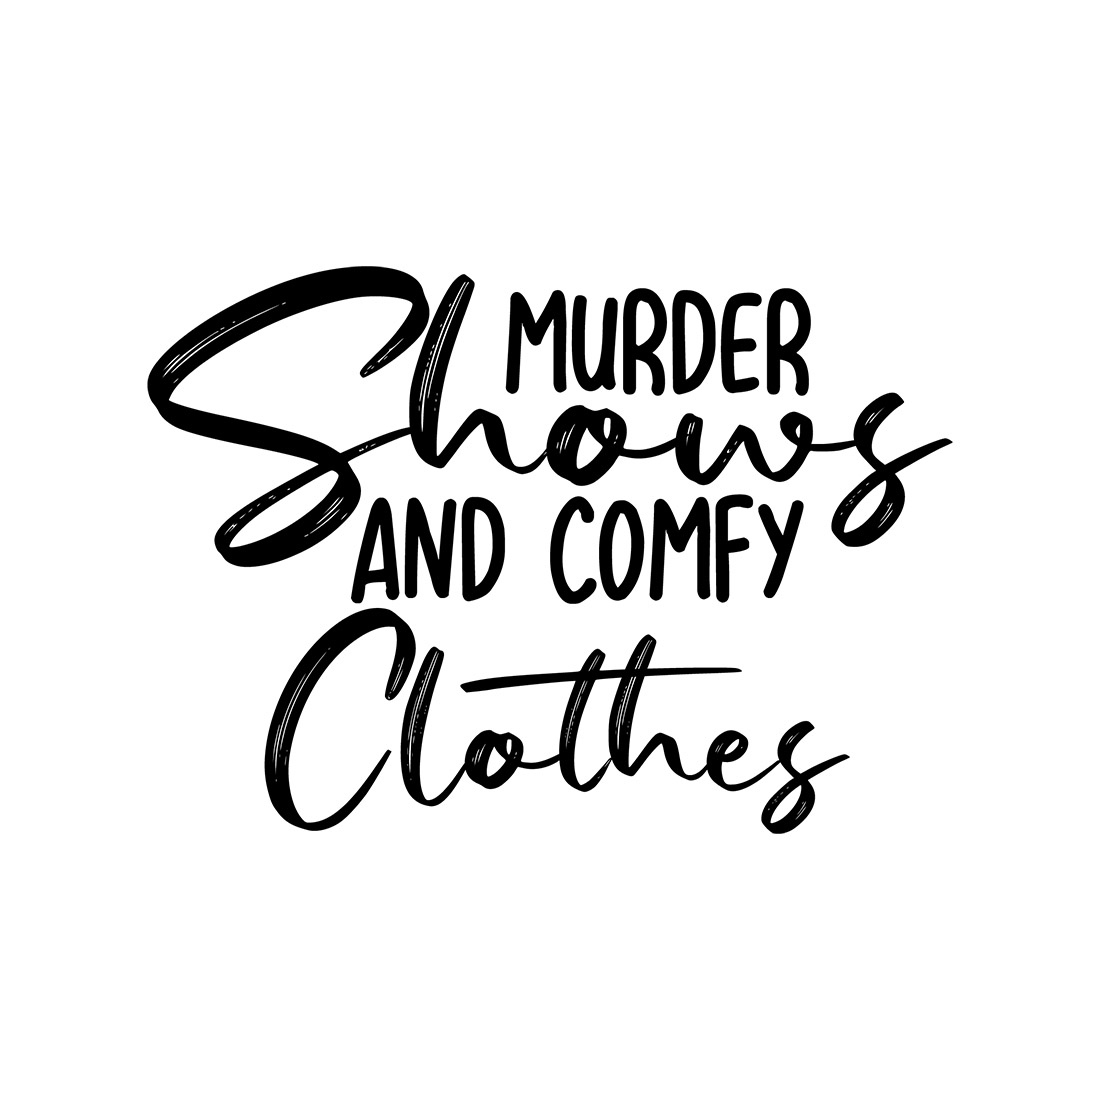 Image with exquisite black lettering Murder Shows and Comfy Clothes.